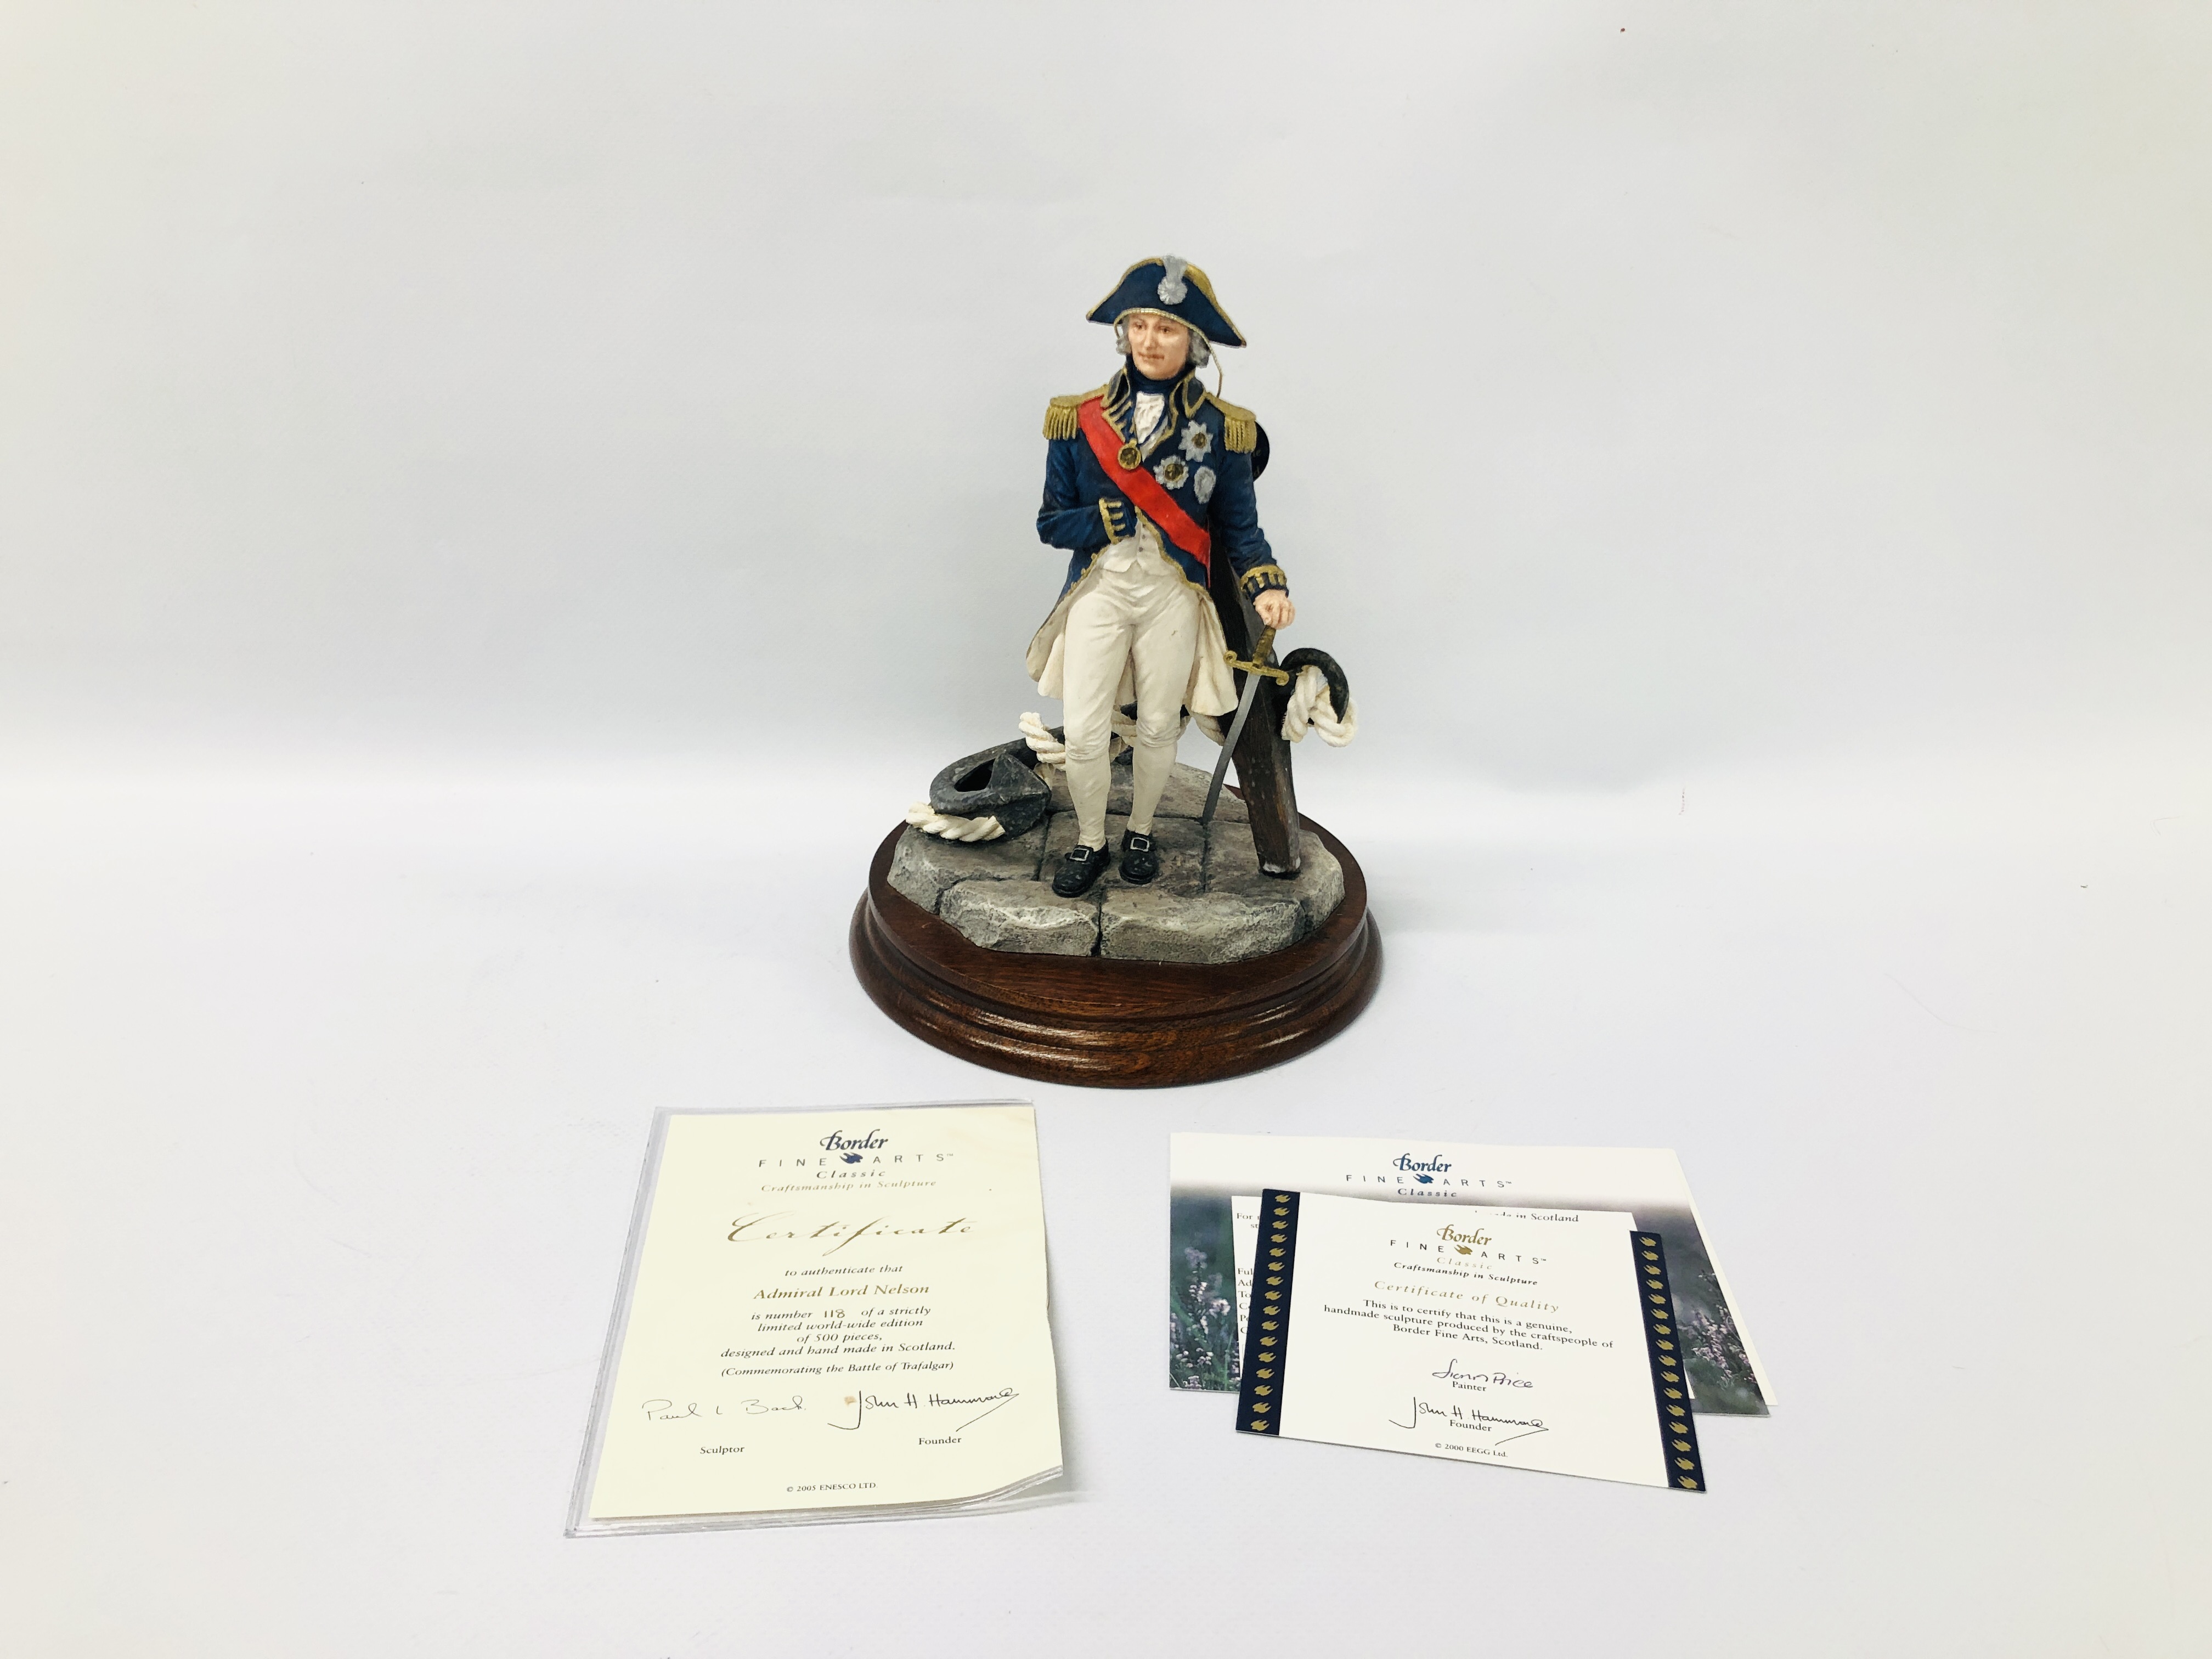 BORDER FINE ARTS LIMITED EDITION SCULPTURE 118 / 500 "ADMIRAL LORD NELSON" ALONG WITH ORIGINAL BOX